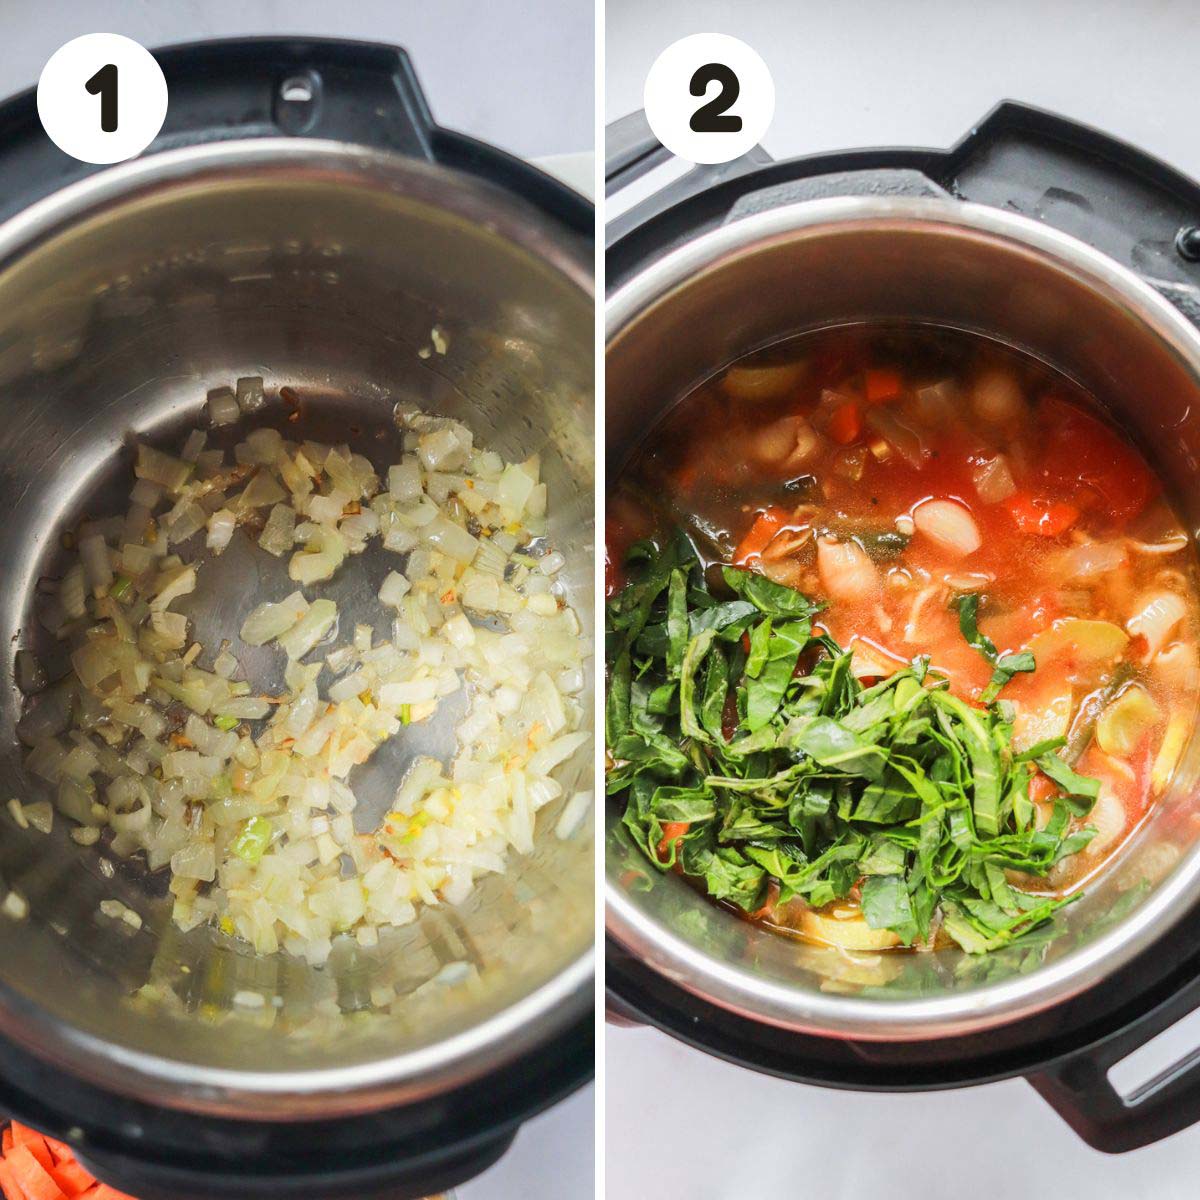 Steps to make the vegetable soup.